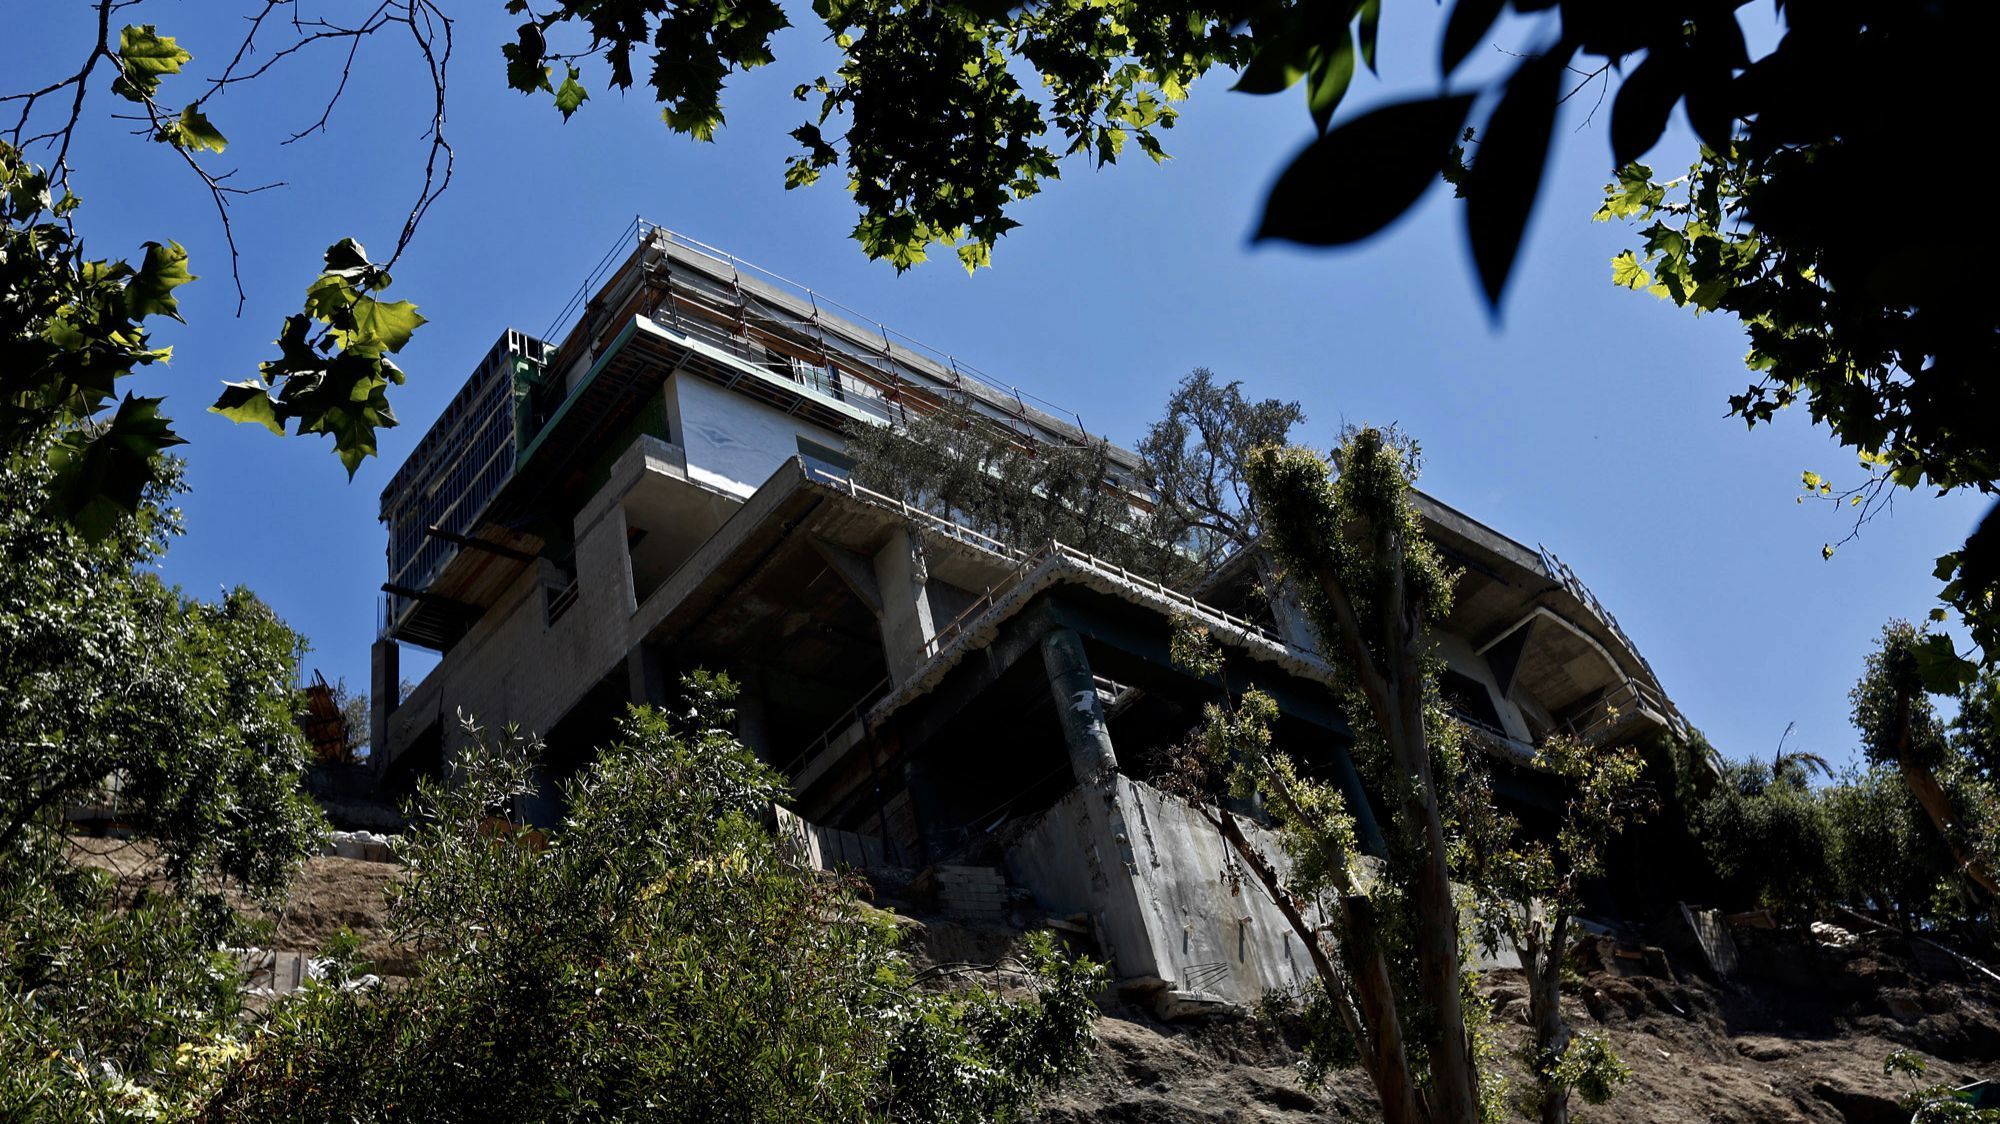 Three years ago, Los Angeles demanded that builders halt work on this mansion in the hills of Bel-Air.